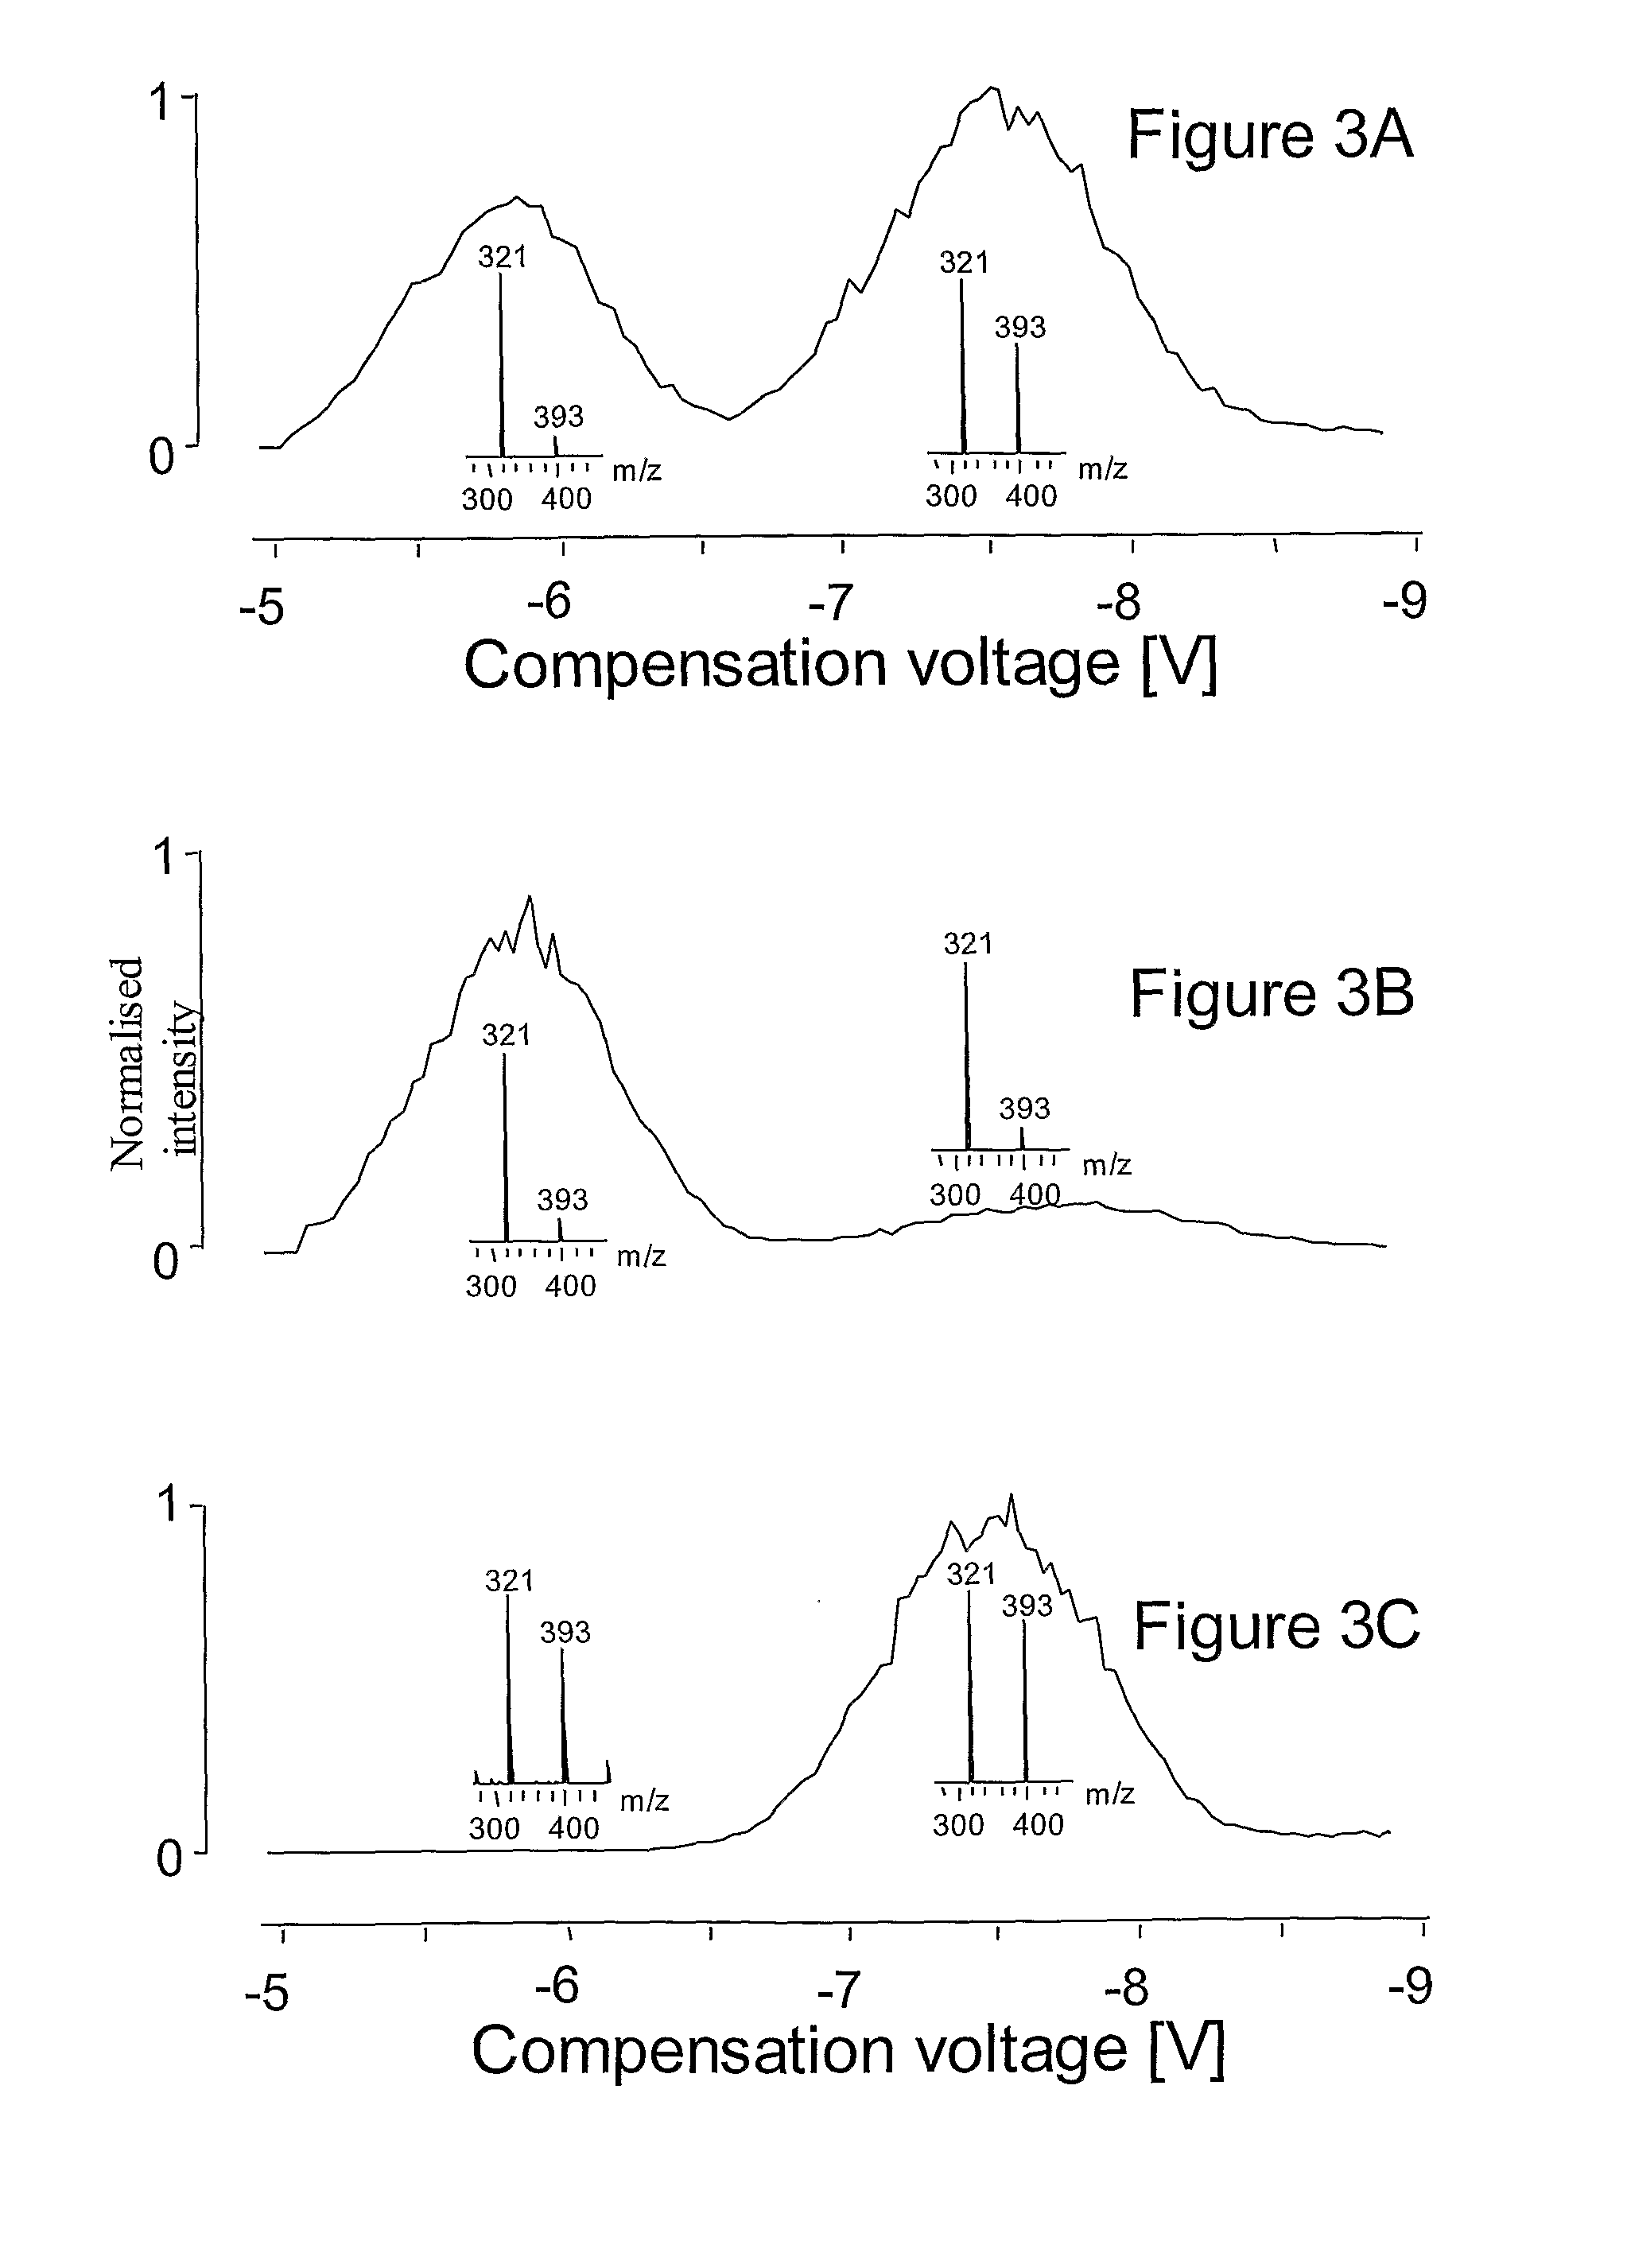 Method for separation of molecules